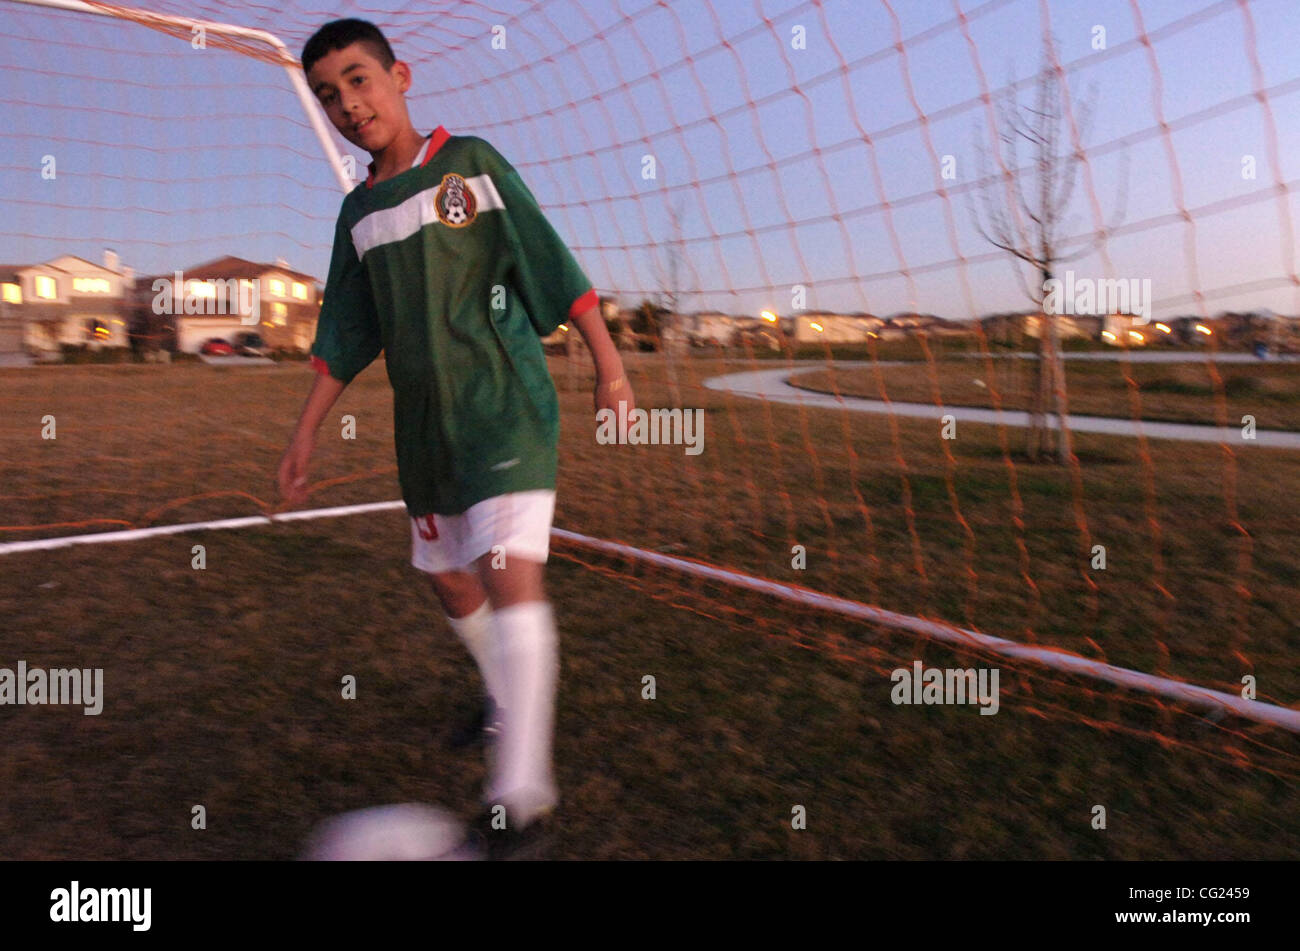 Daniel Cisneros, 12, of Natomas, practices goal keeping at Burberry Community Park in Natomas on Thursday, January 11,  2007. Cisneros said that he doesn't like the lack of restrooms at the park. (  The Sacramento Bee Hector Amezcua ) Stock Photo